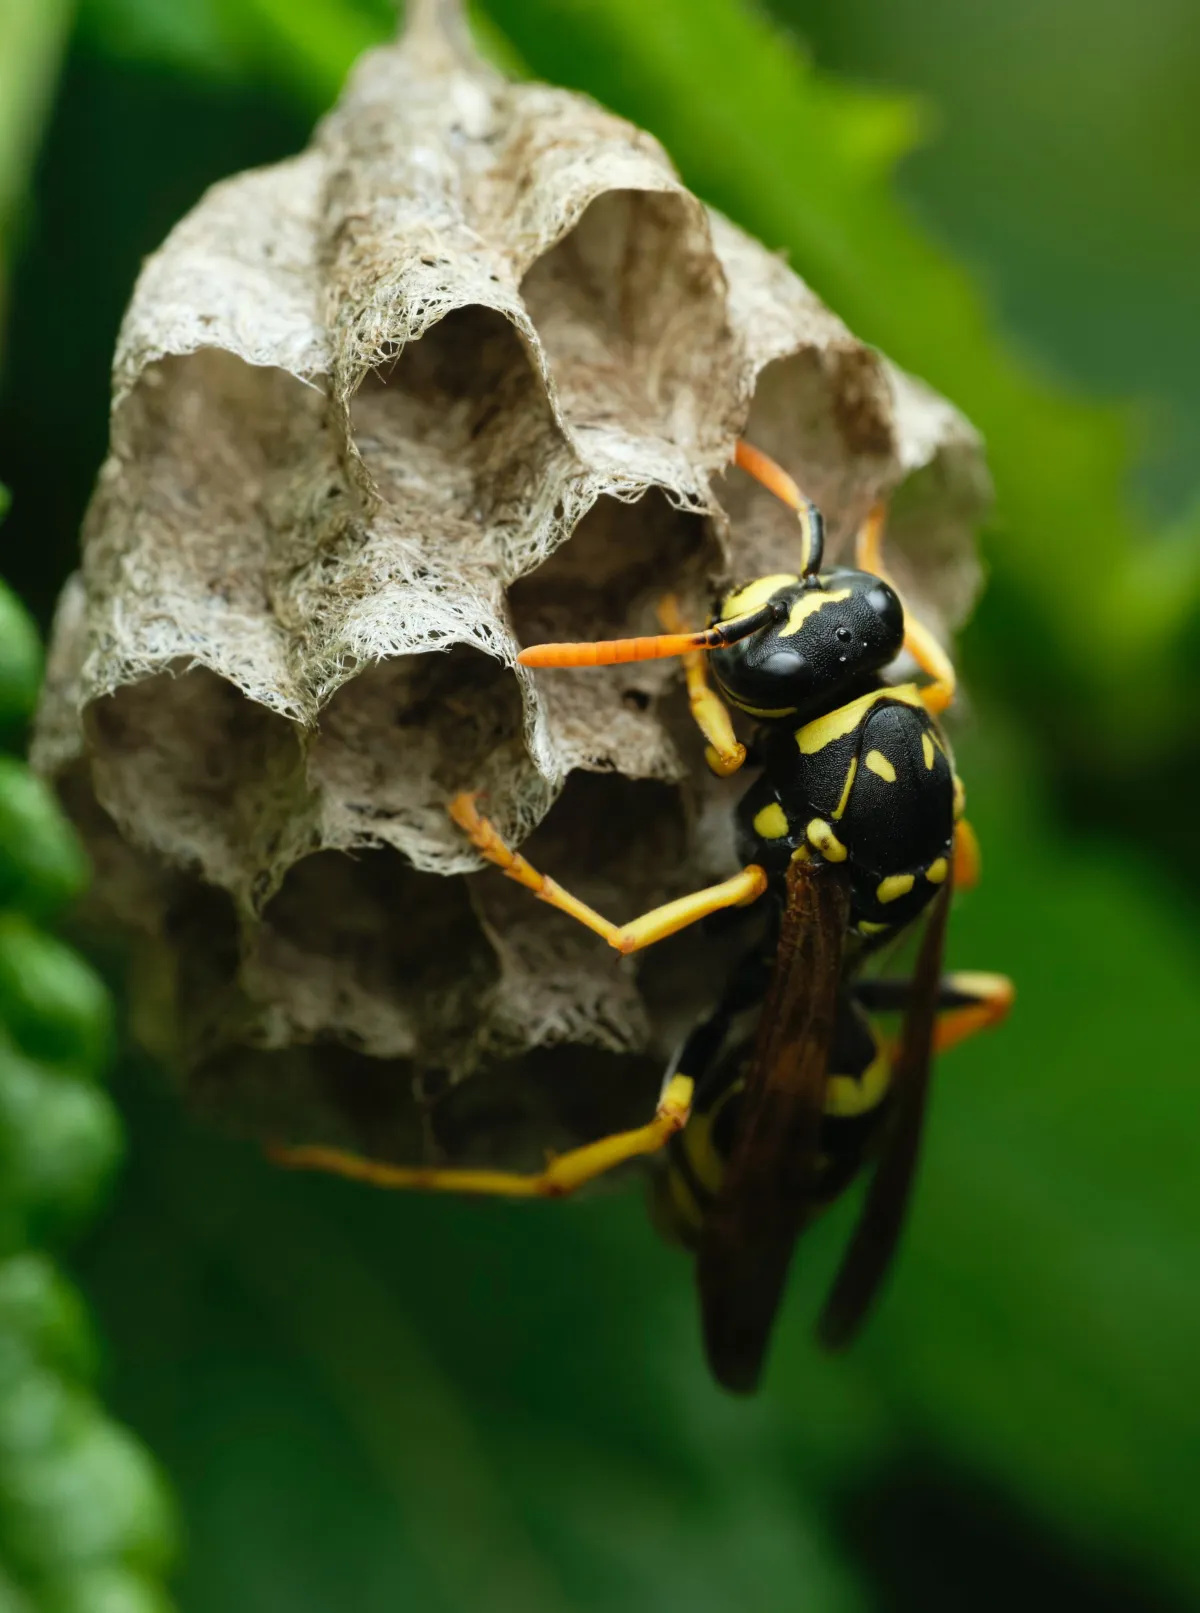 a close up photograph of a wasp building a nest